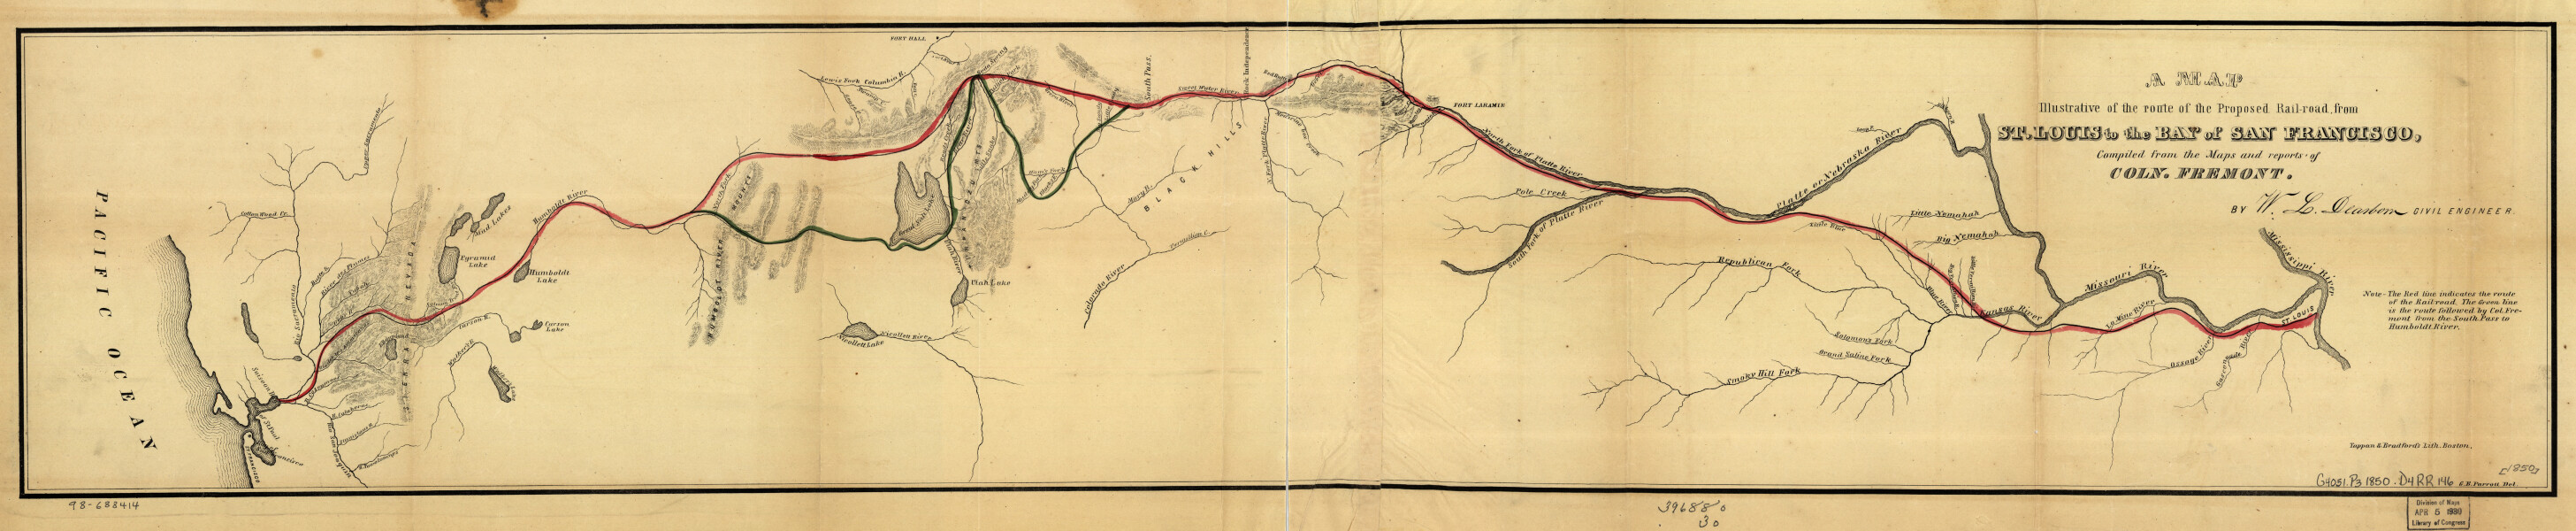 E72 - A Map Illustrative of the Route of the Proposed Railroad from St Louis to the Bay of San Francisco - William L Dearborn - 1850